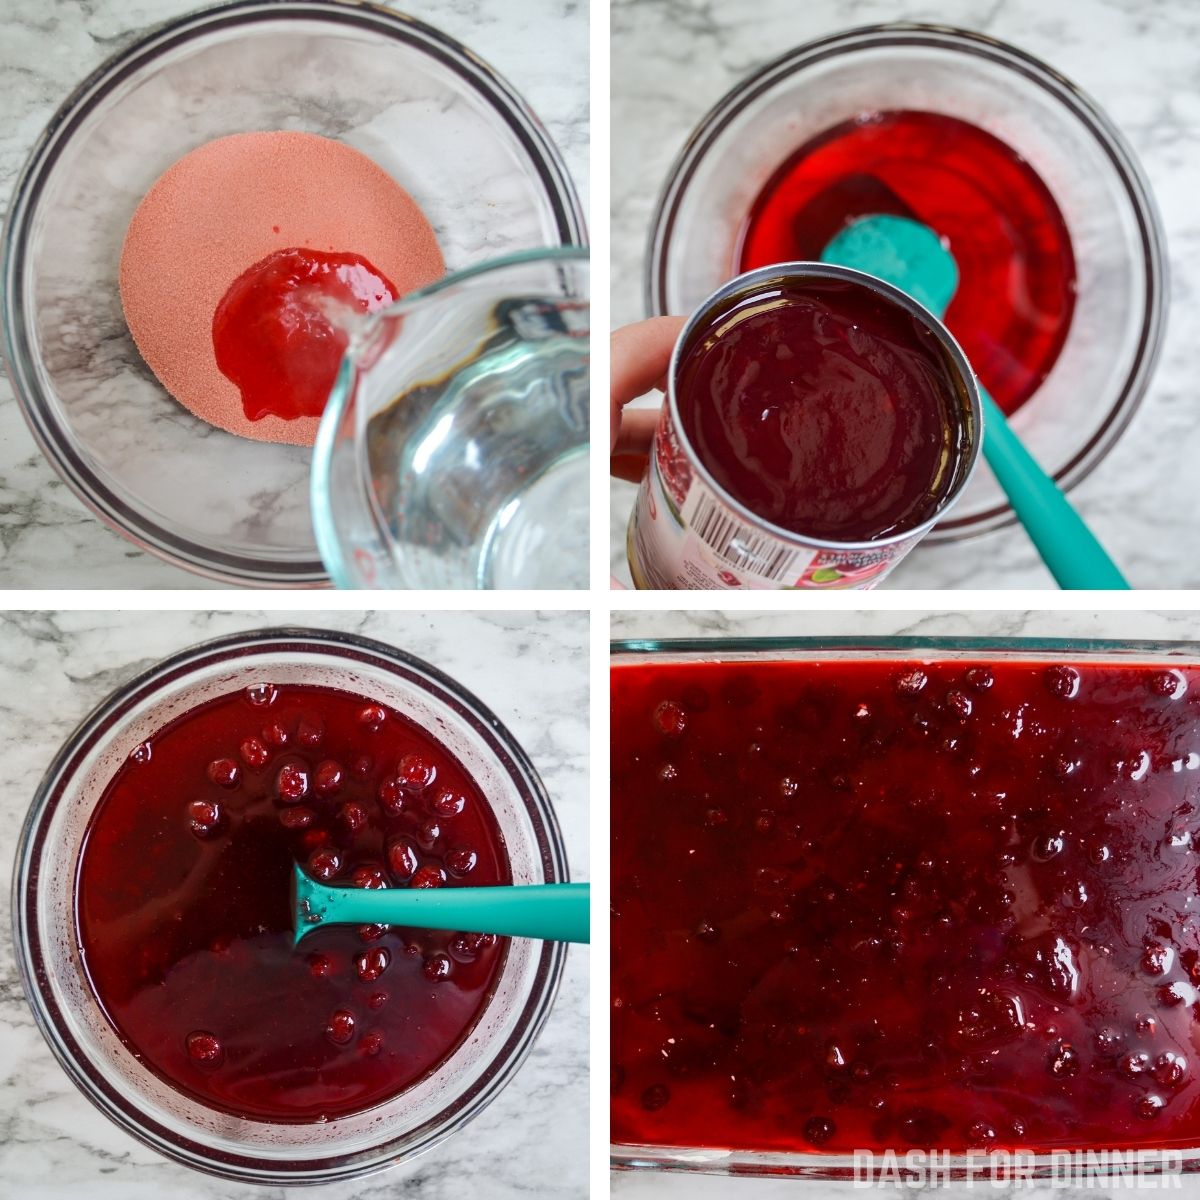 Making a cranberry and jello topping for a no bake dessert